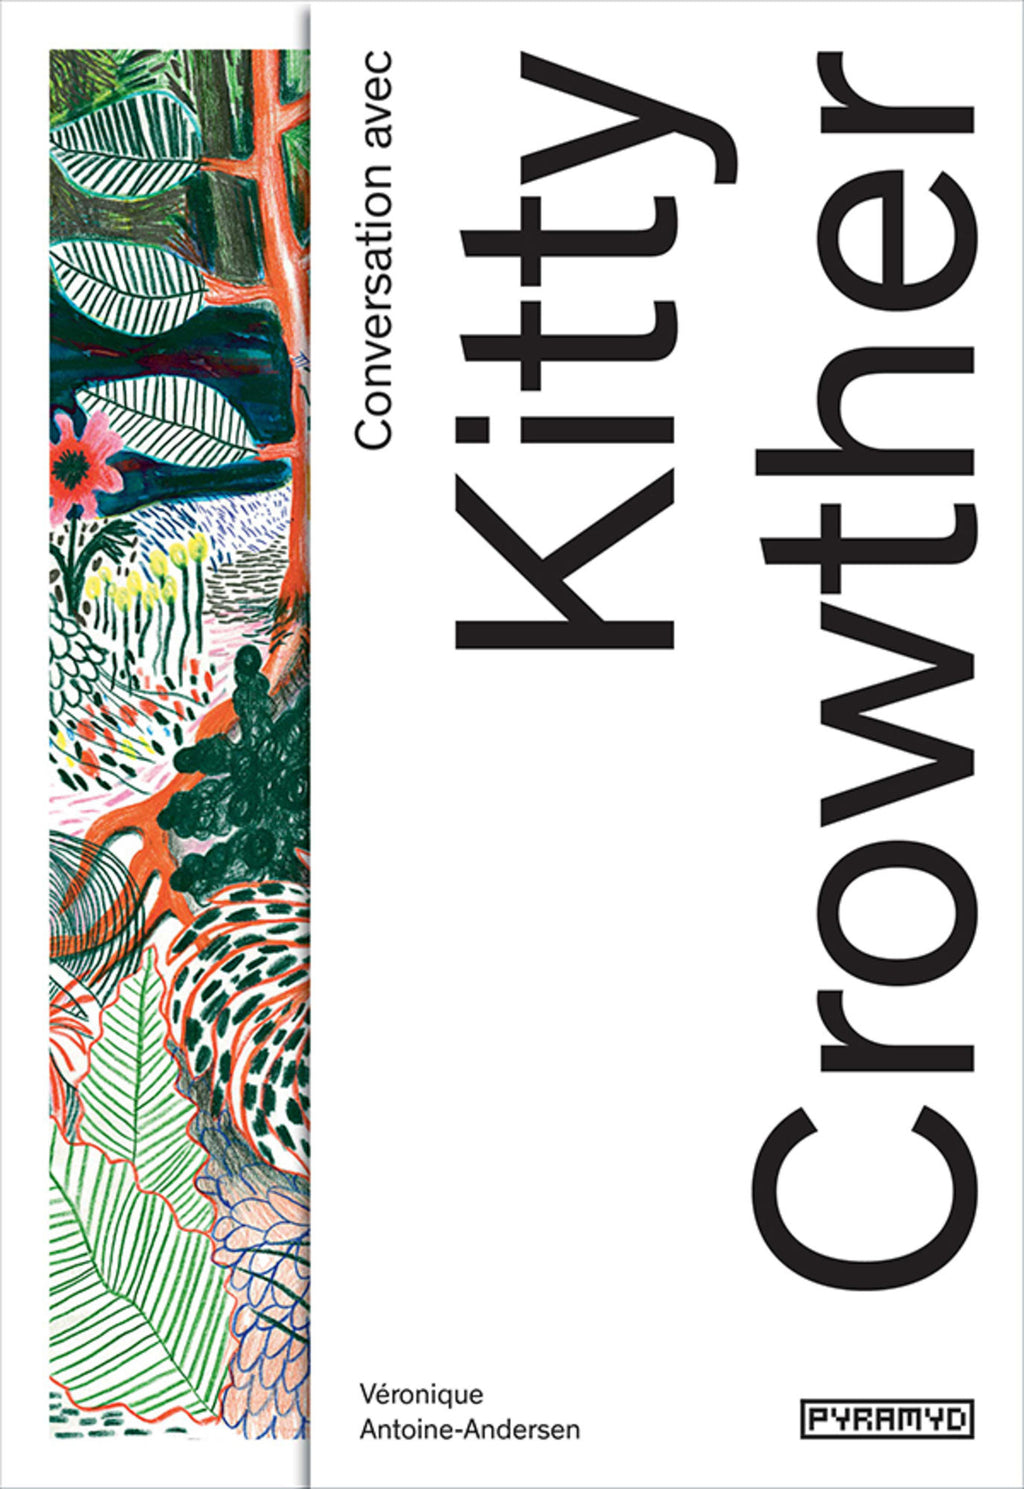 Conversation avec Kitty Crowther